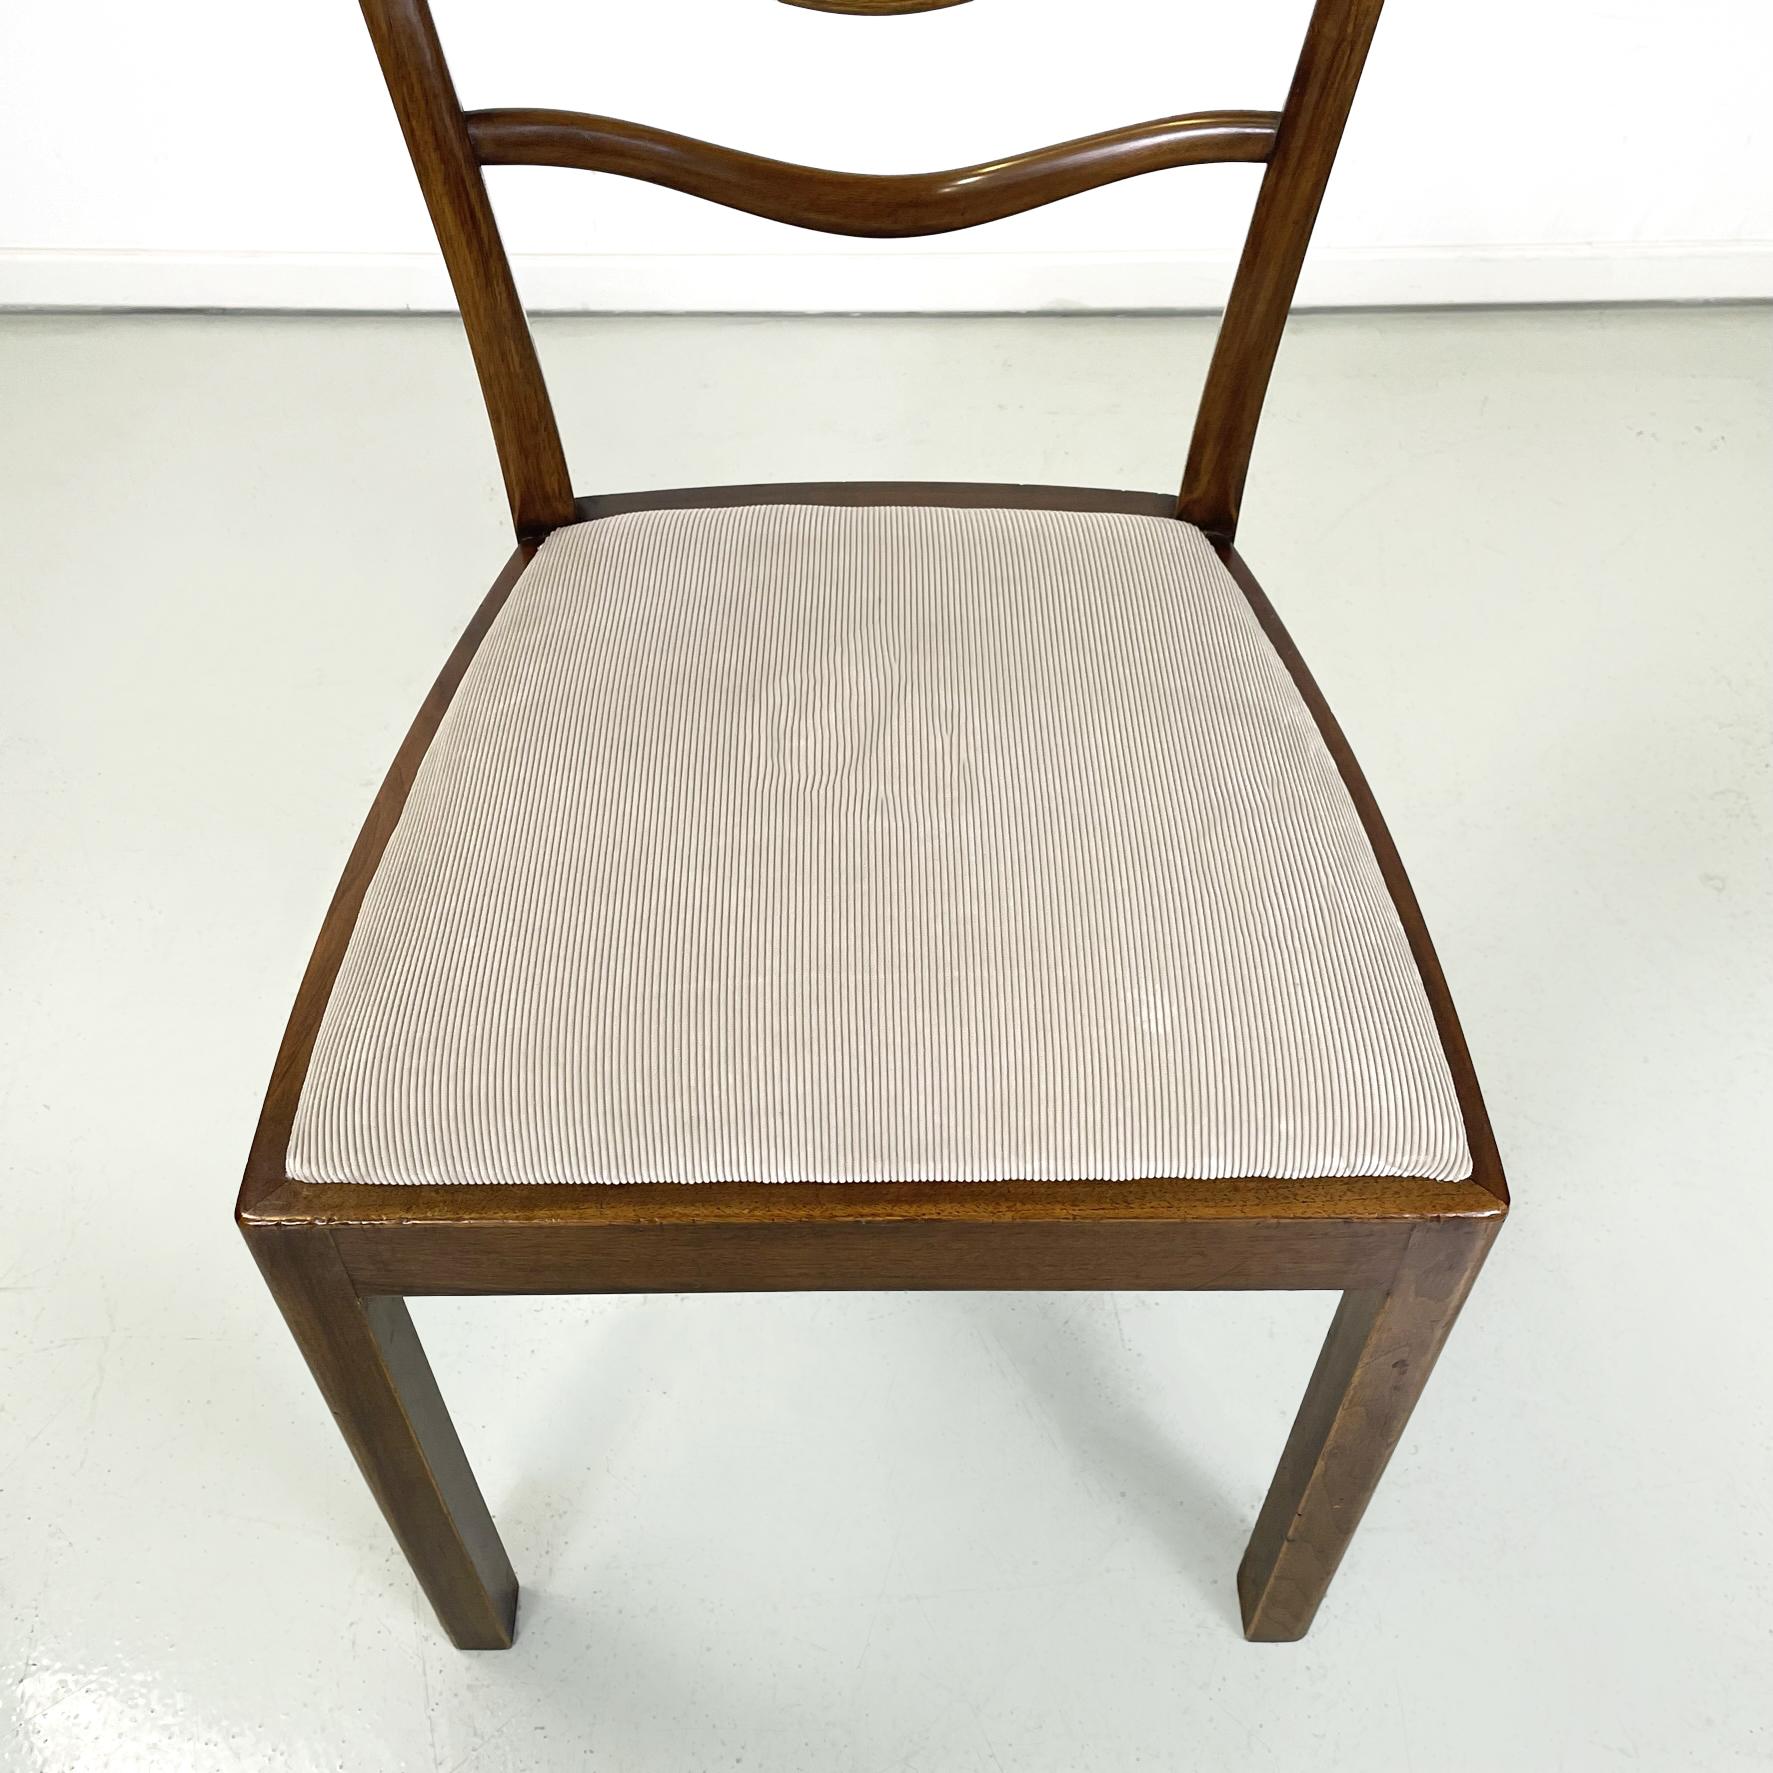 Hungary Art Deco Chairs in wood and beige corduroy velvet, 1930s For Sale 3